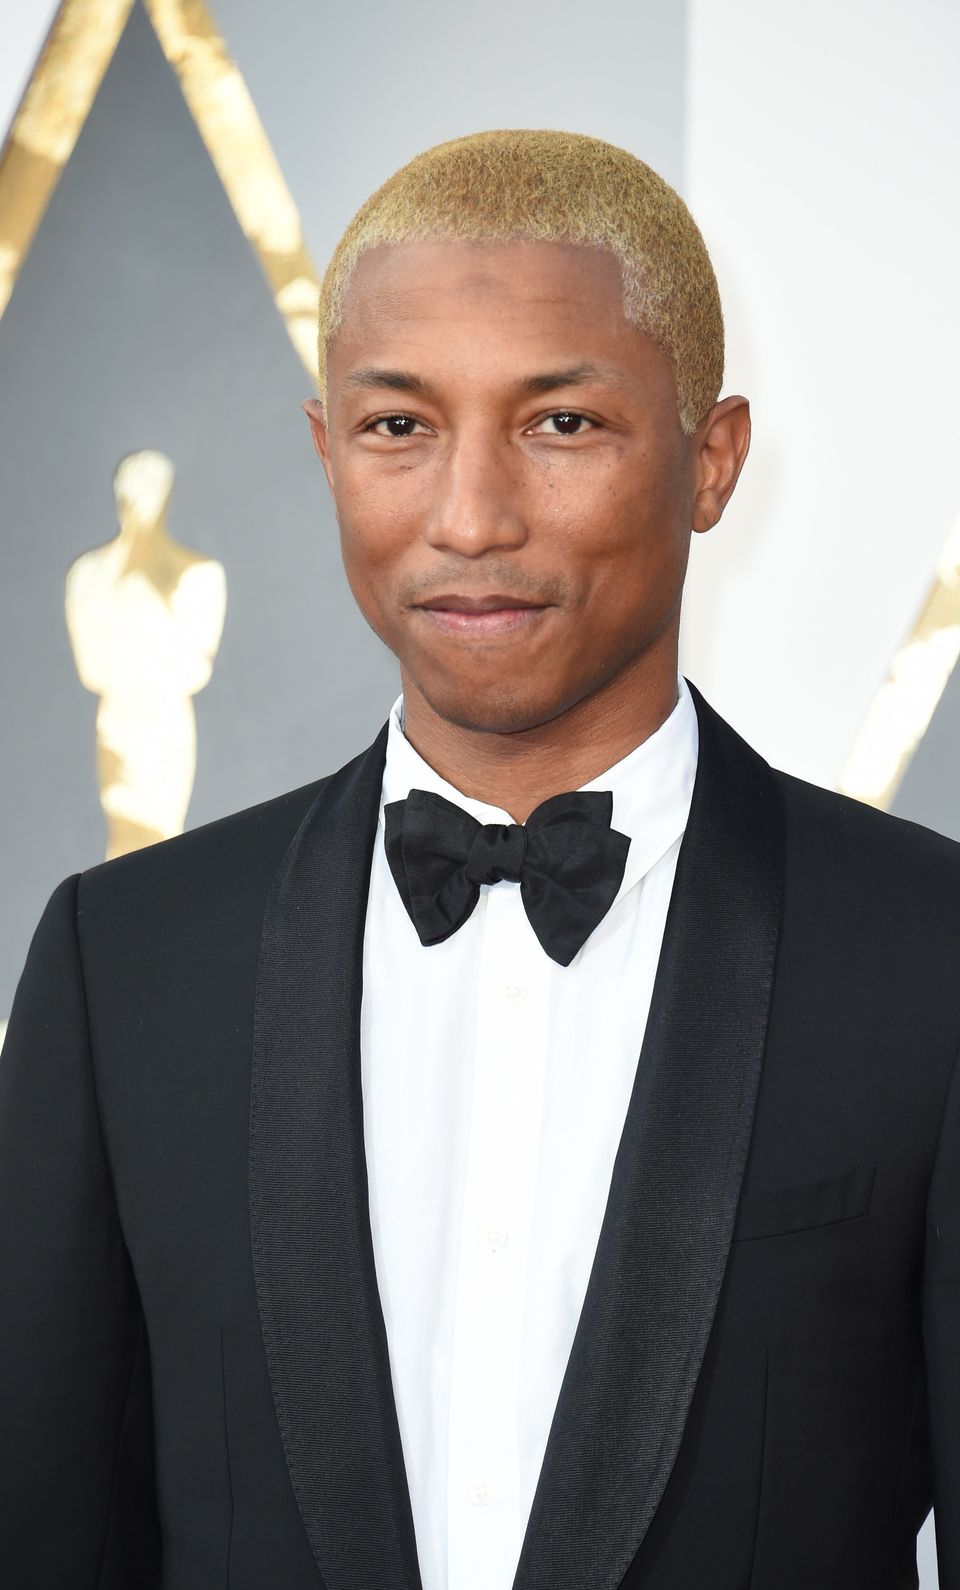 Proof That Pharrell Williams Is Aging Better Than The Rest Of Us